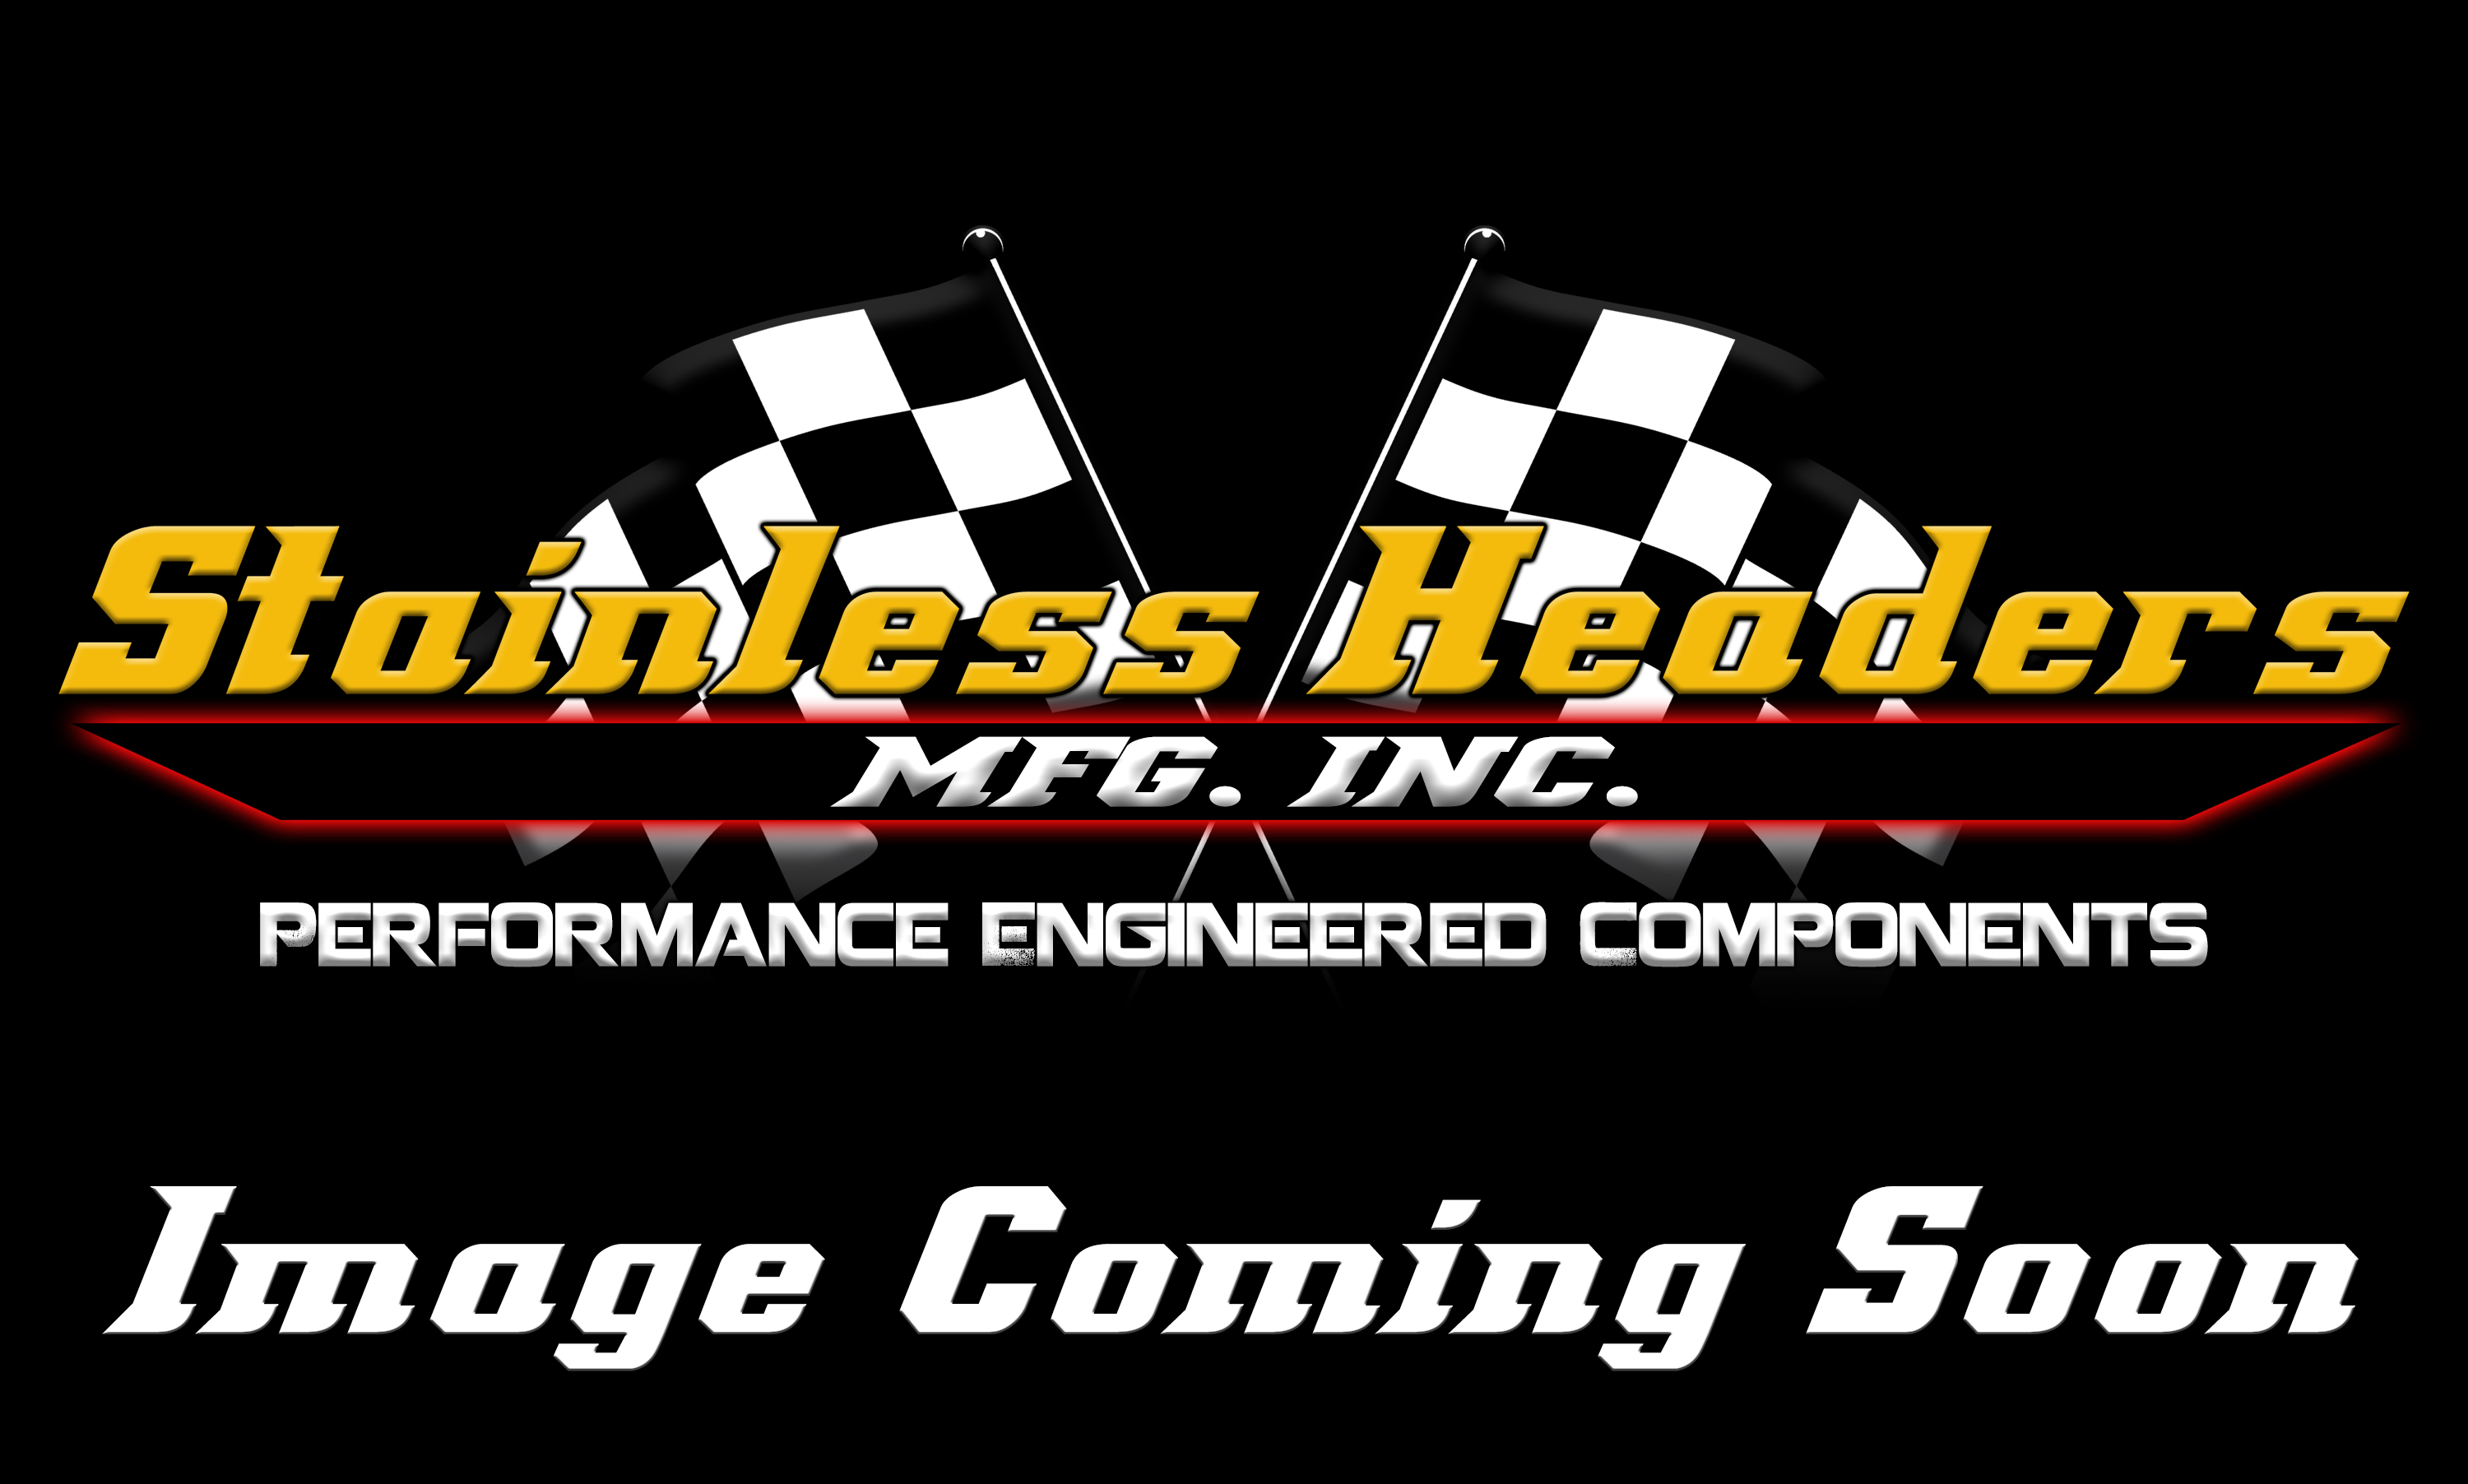 Custom Header Components - Merge Collectors - Stainless Headers - 1 5/8" Primary 3 into 1 Performance Merge Collector-16ga Mild Steel